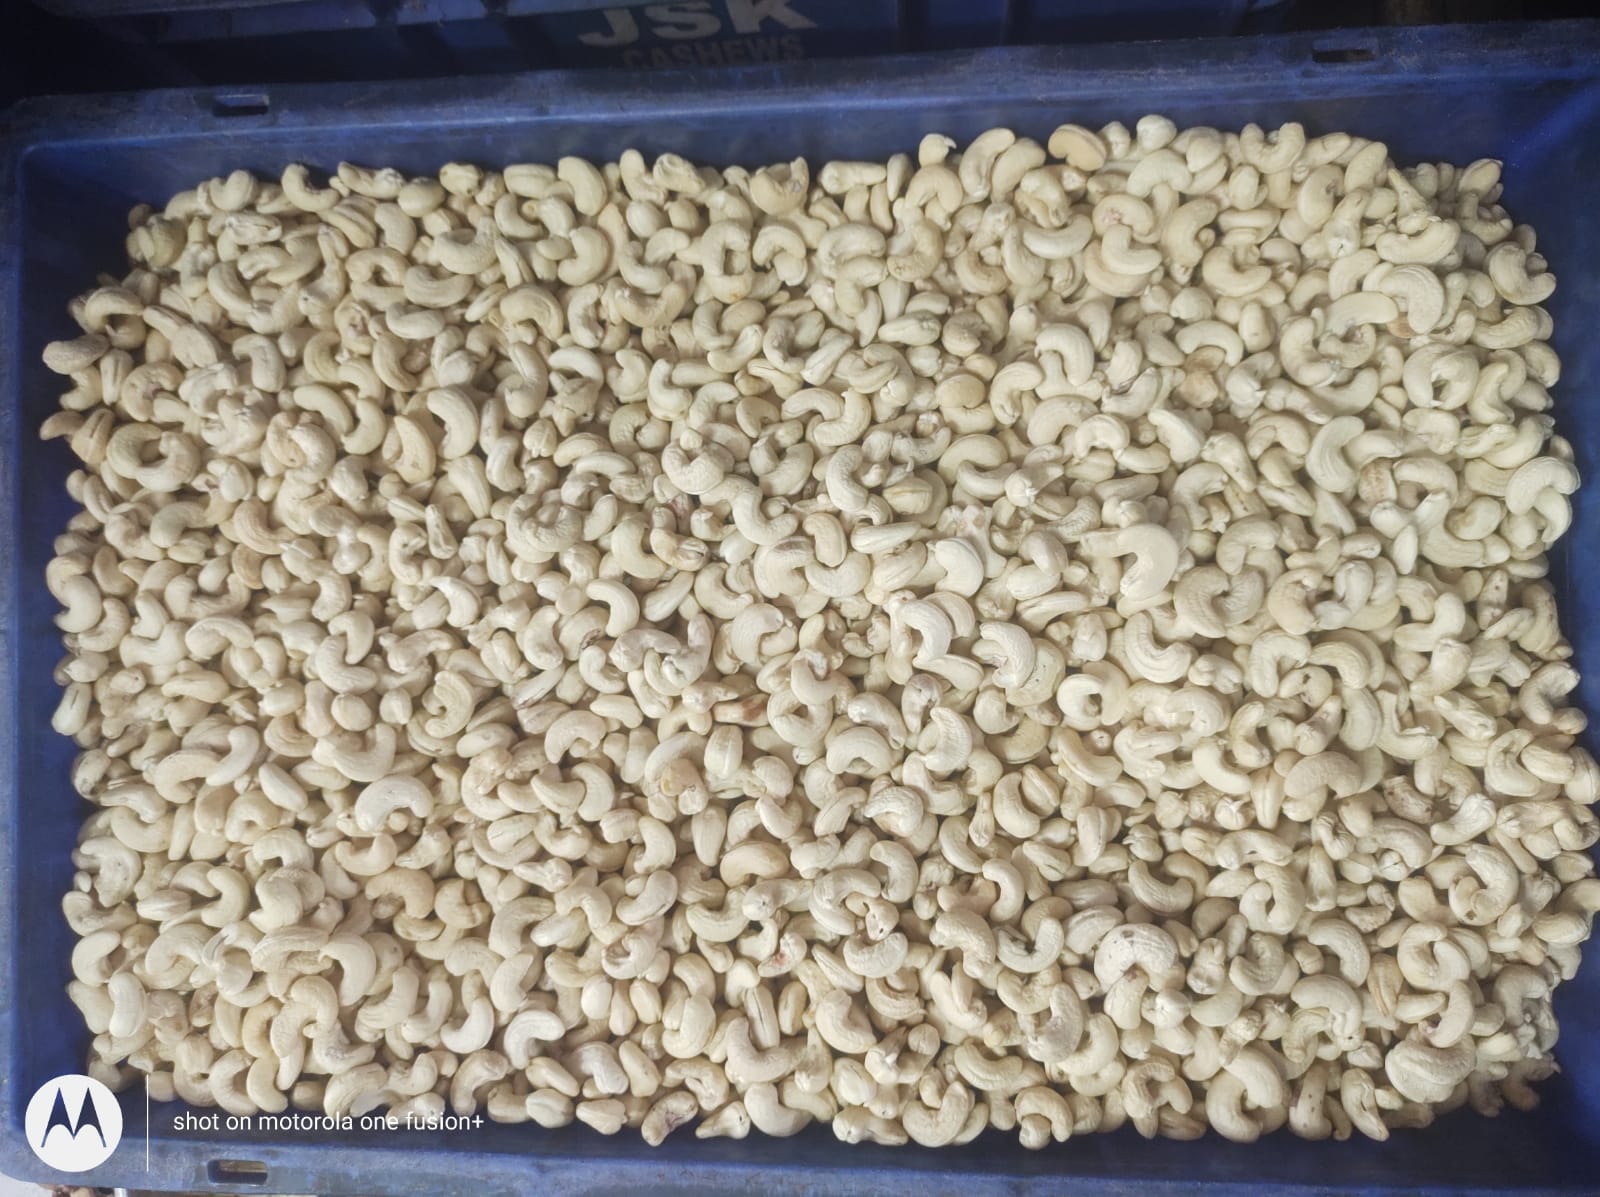 Processed cashew nuts with good quality from Gunatraders